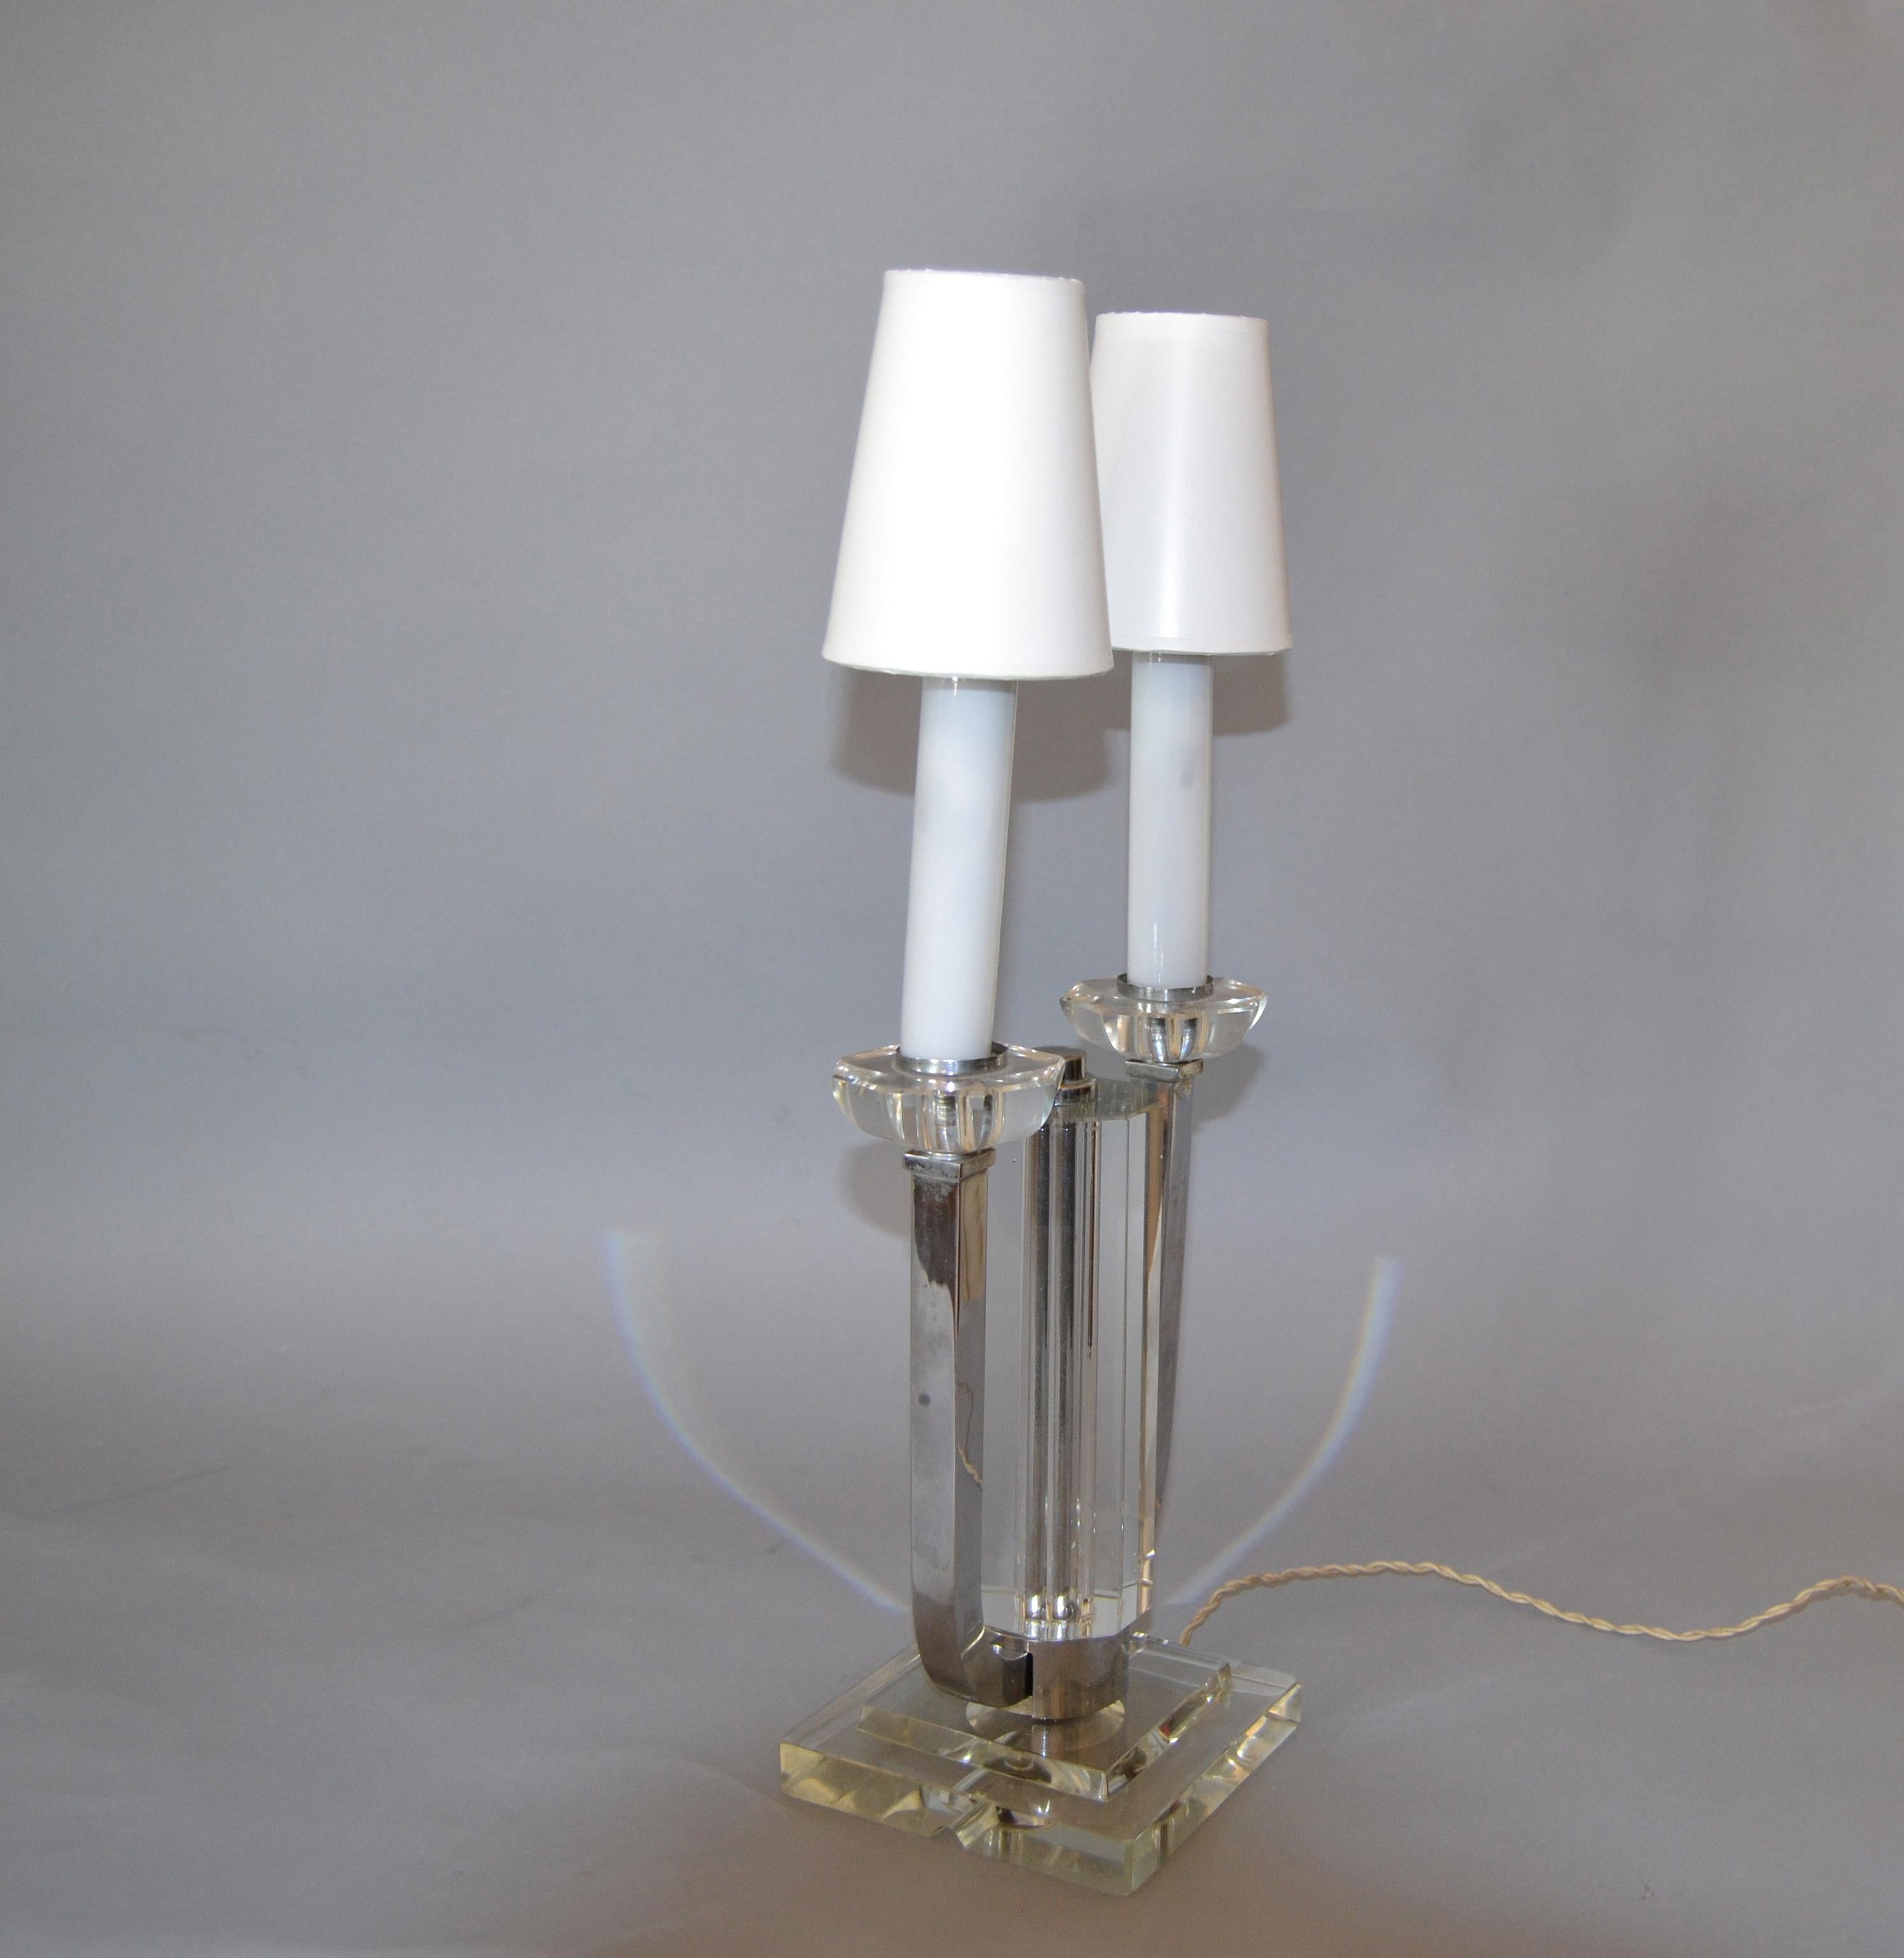 Boris Jean Lacroix French Art Deco nickel and crystal table lamp.
The crystal column in the center and 2 nickel arms holding the lights with shades.
In perfect working condition, with original French electrical components. We used the adapter for